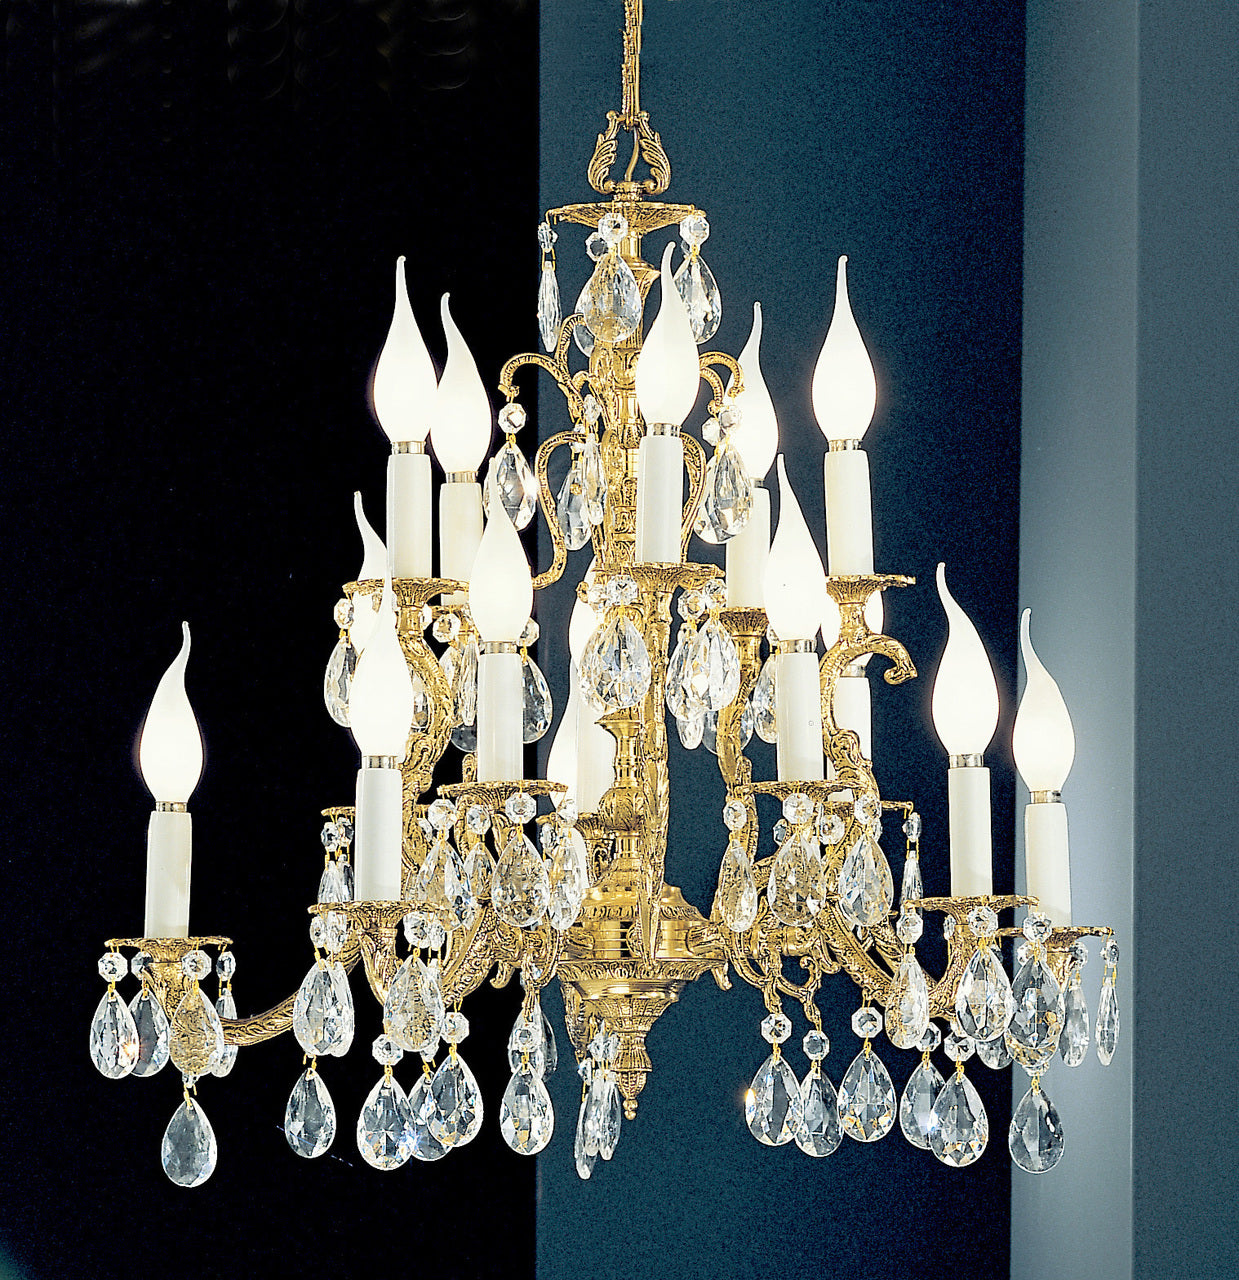 Classic Lighting 5515 OWB C Barcelona Crystal/Cast Brass Chandelier in Olde World Bronze (Imported from Spain)